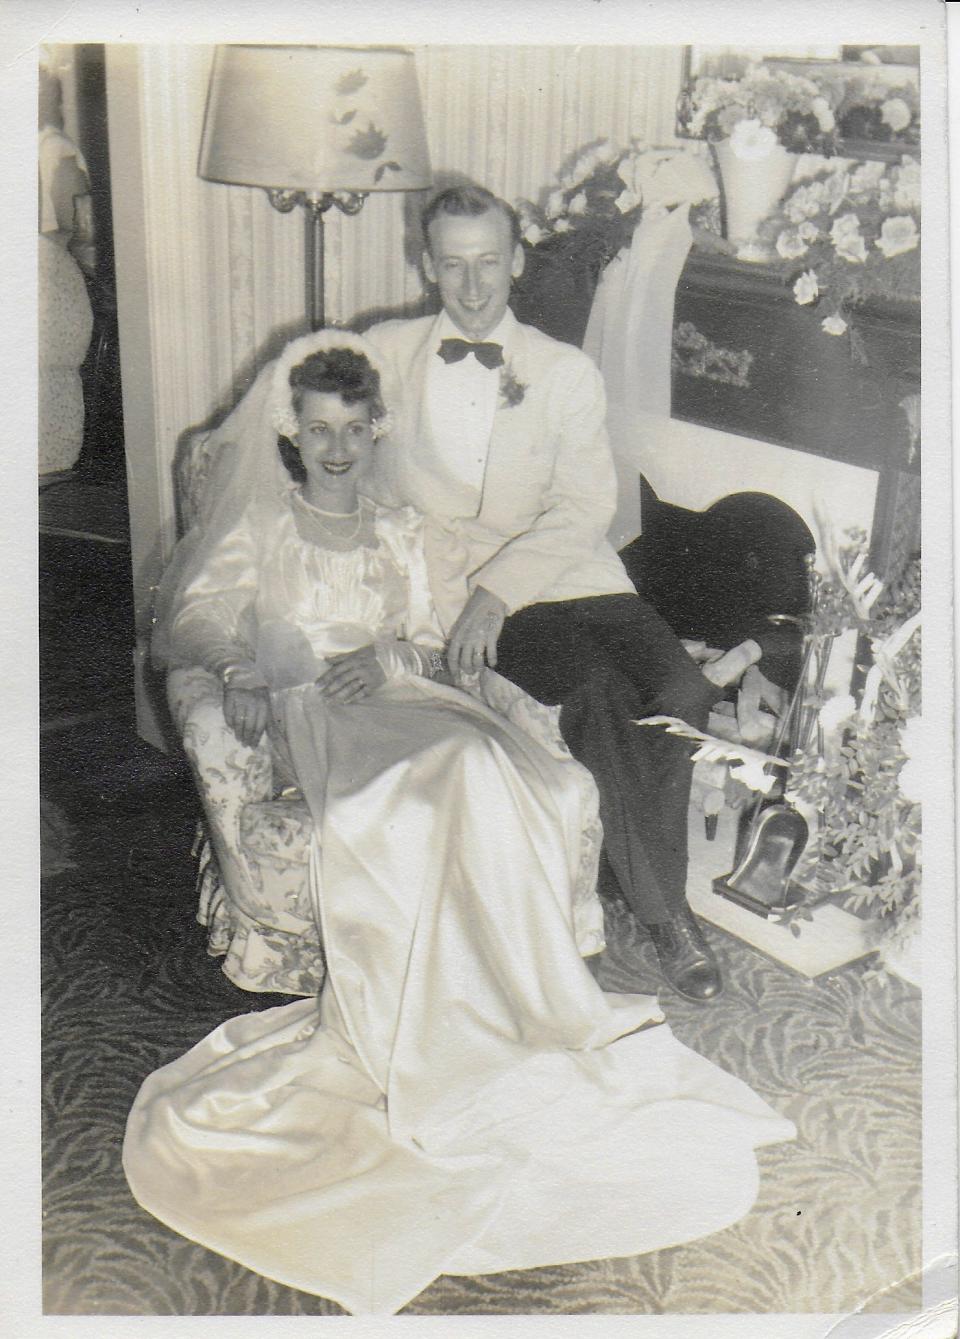 Edna Long and Kenneth Bladen on their wedding day, Aug. 30, 1947, in his mother's Capitol Heights, Md., home.